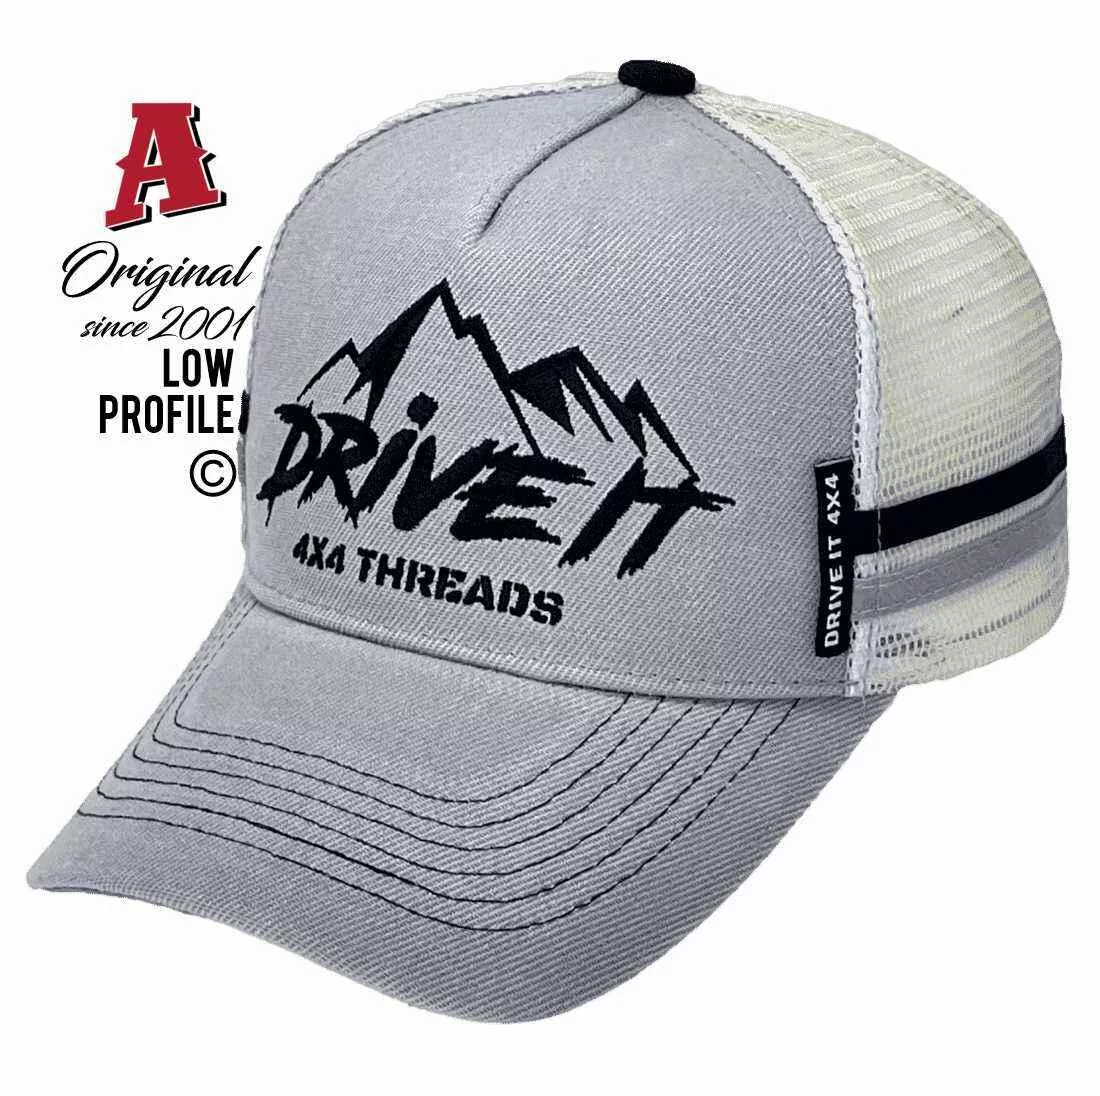 ARB Tamworth NSW Drive It 4x4 Threads Basic Aussie Trucker Hats Low Profile with 3d Embroidered logo Black on Grey Snapback